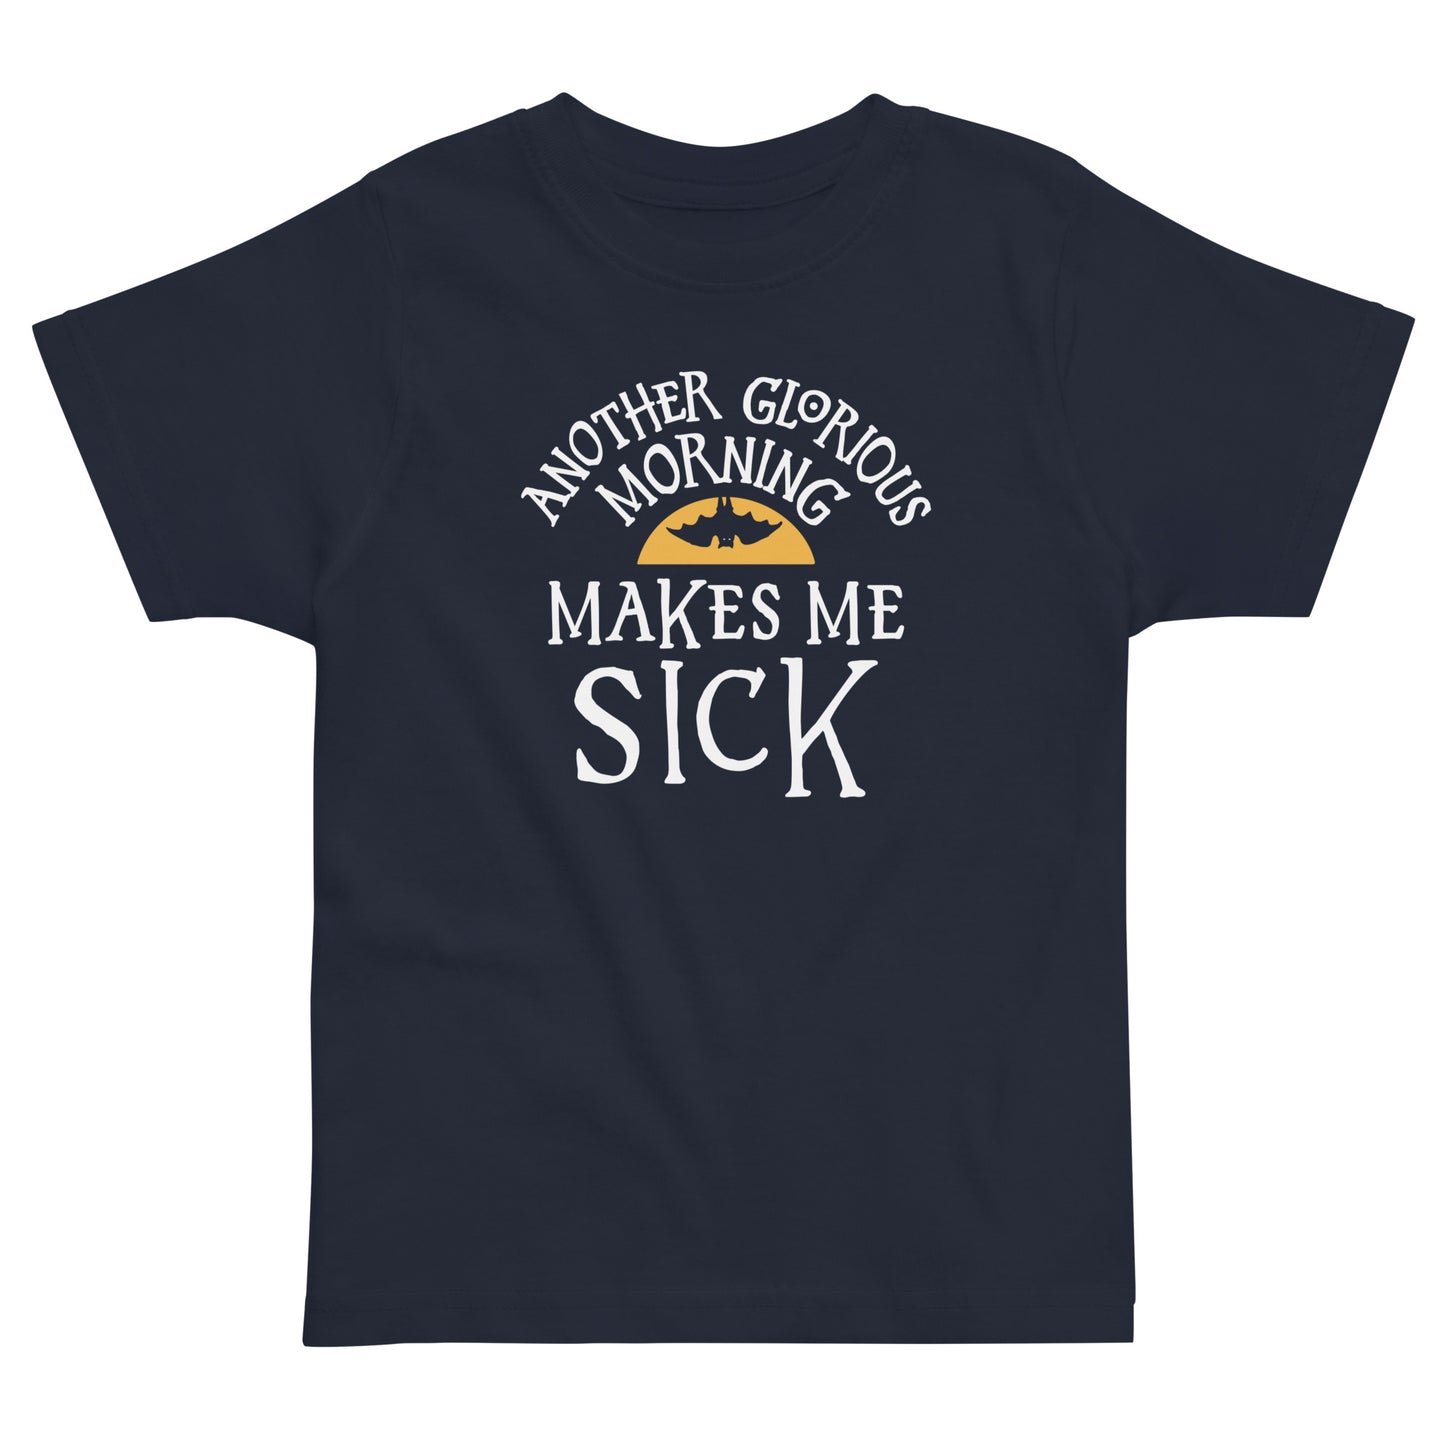 Another Glorious Morning Kid's Toddler Tee